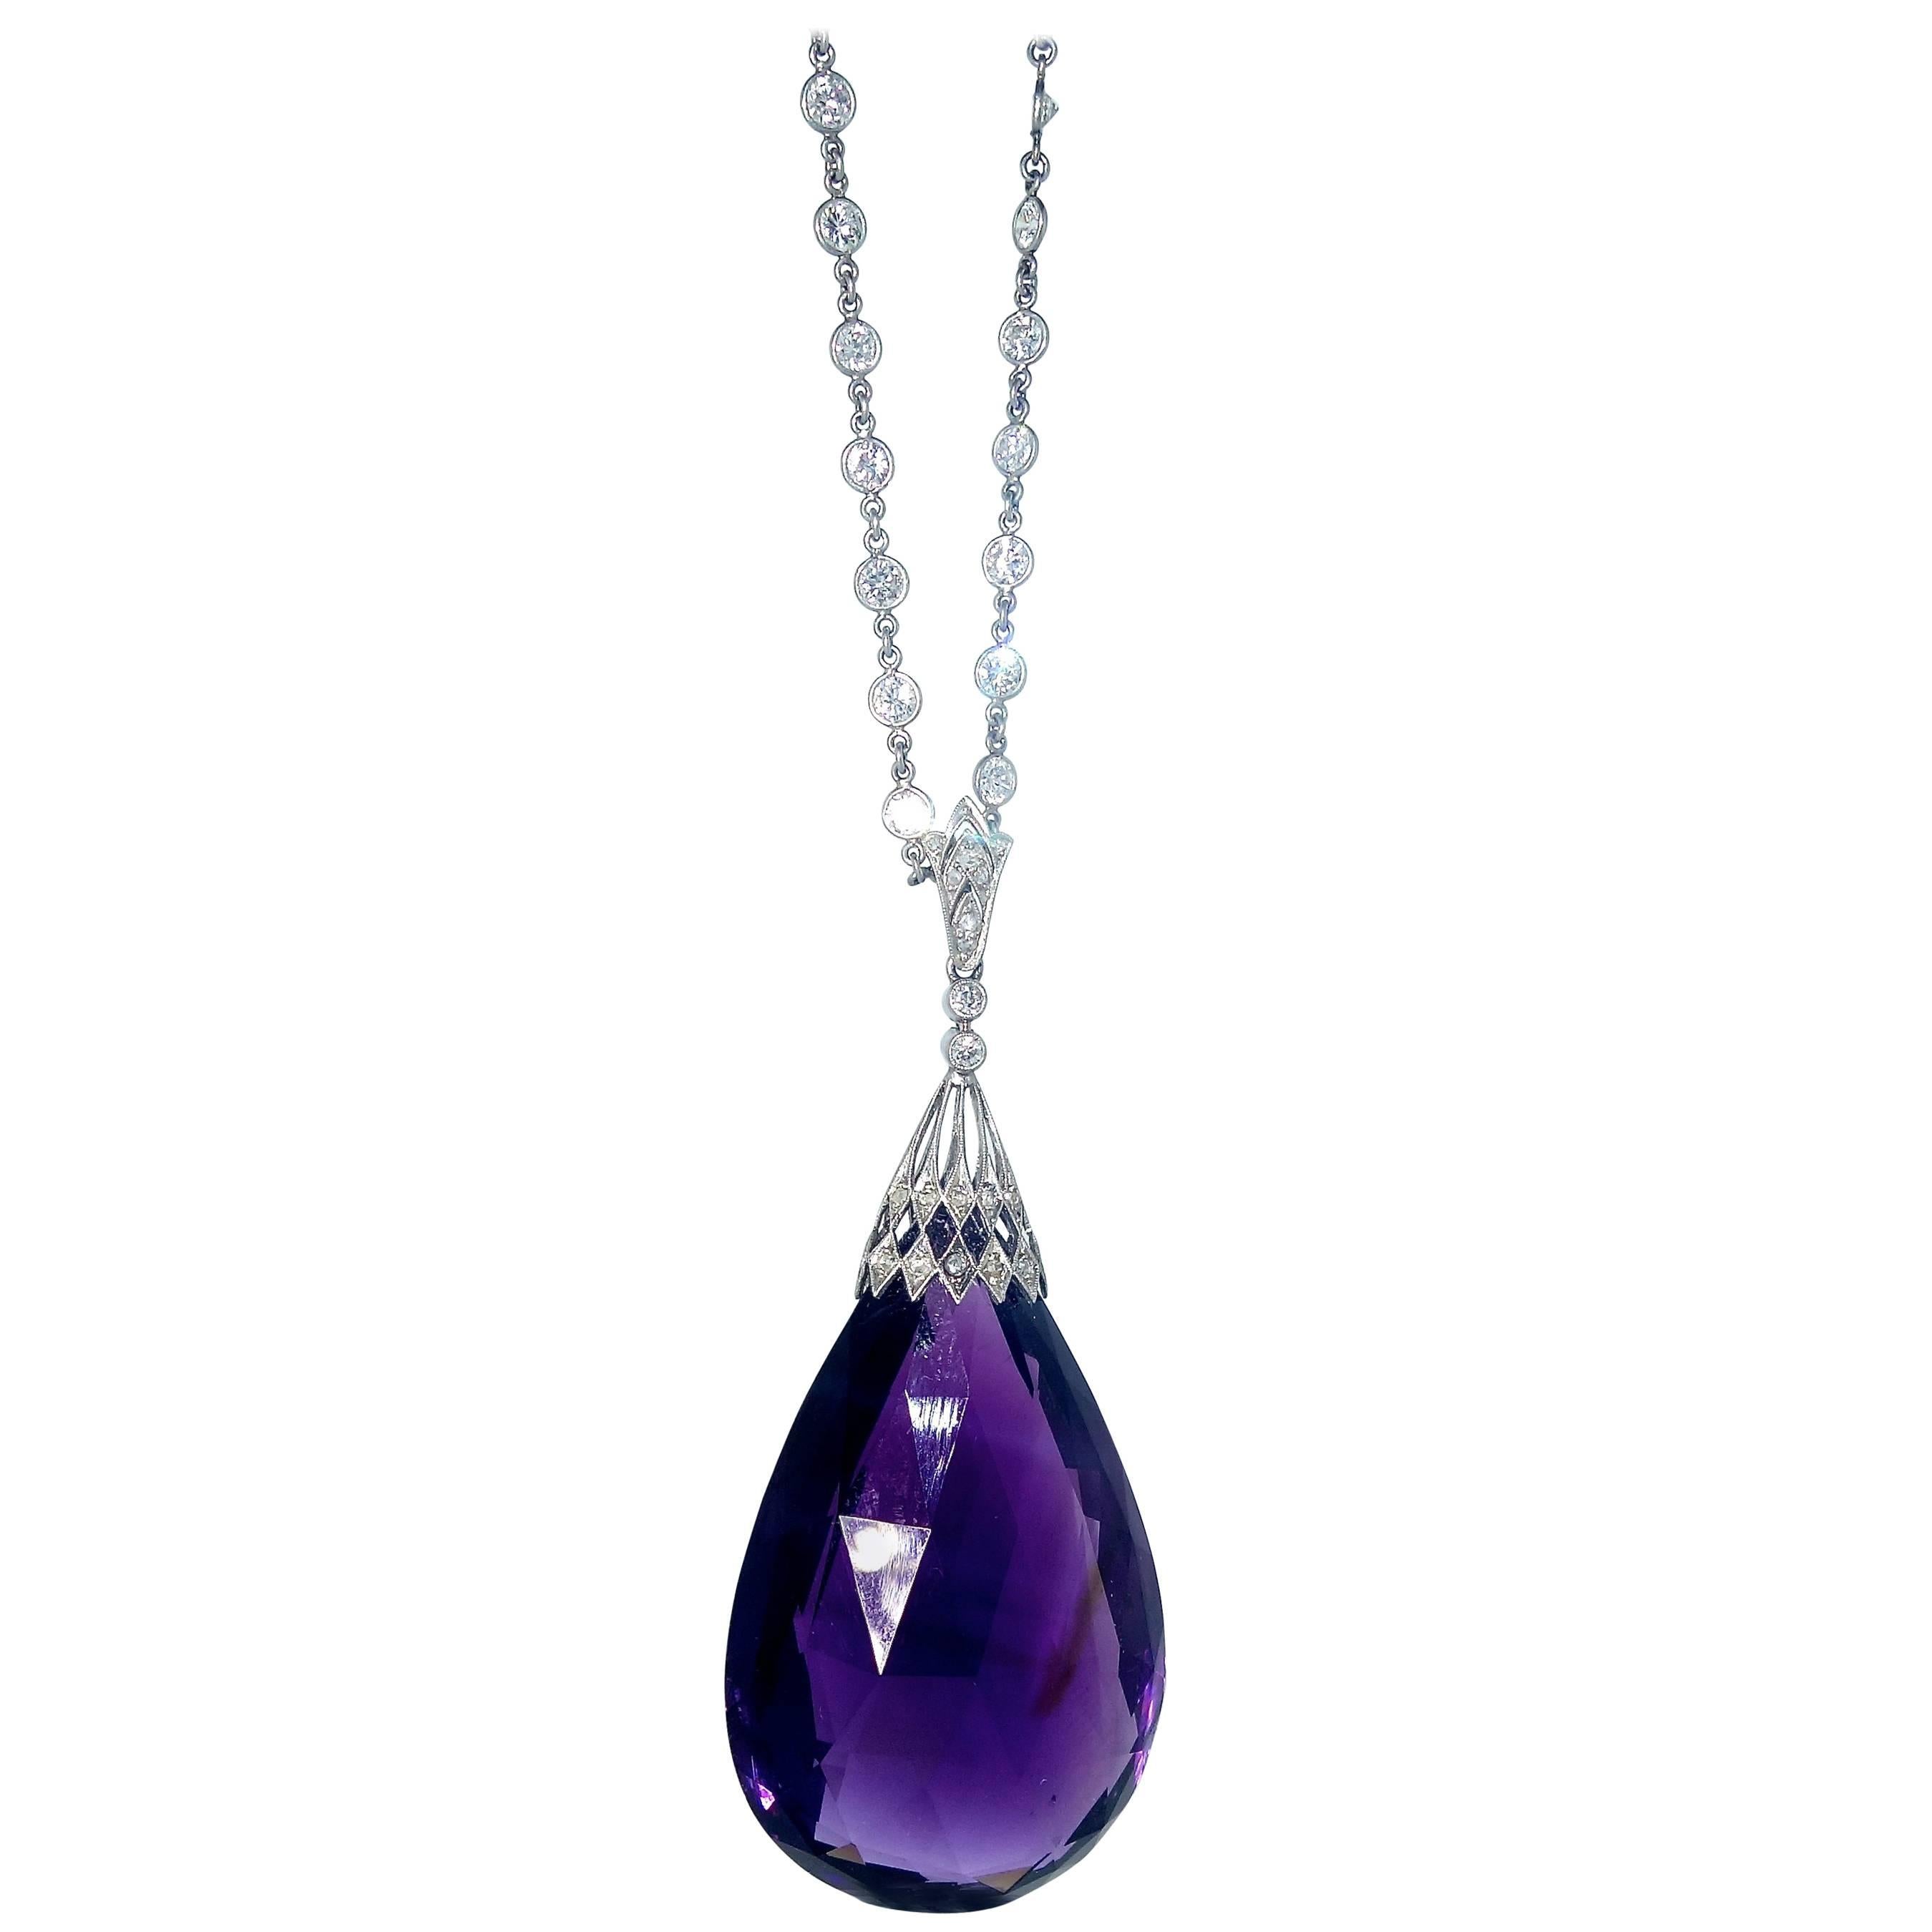 Fine Briolette Amethyst and Diamond Necklace